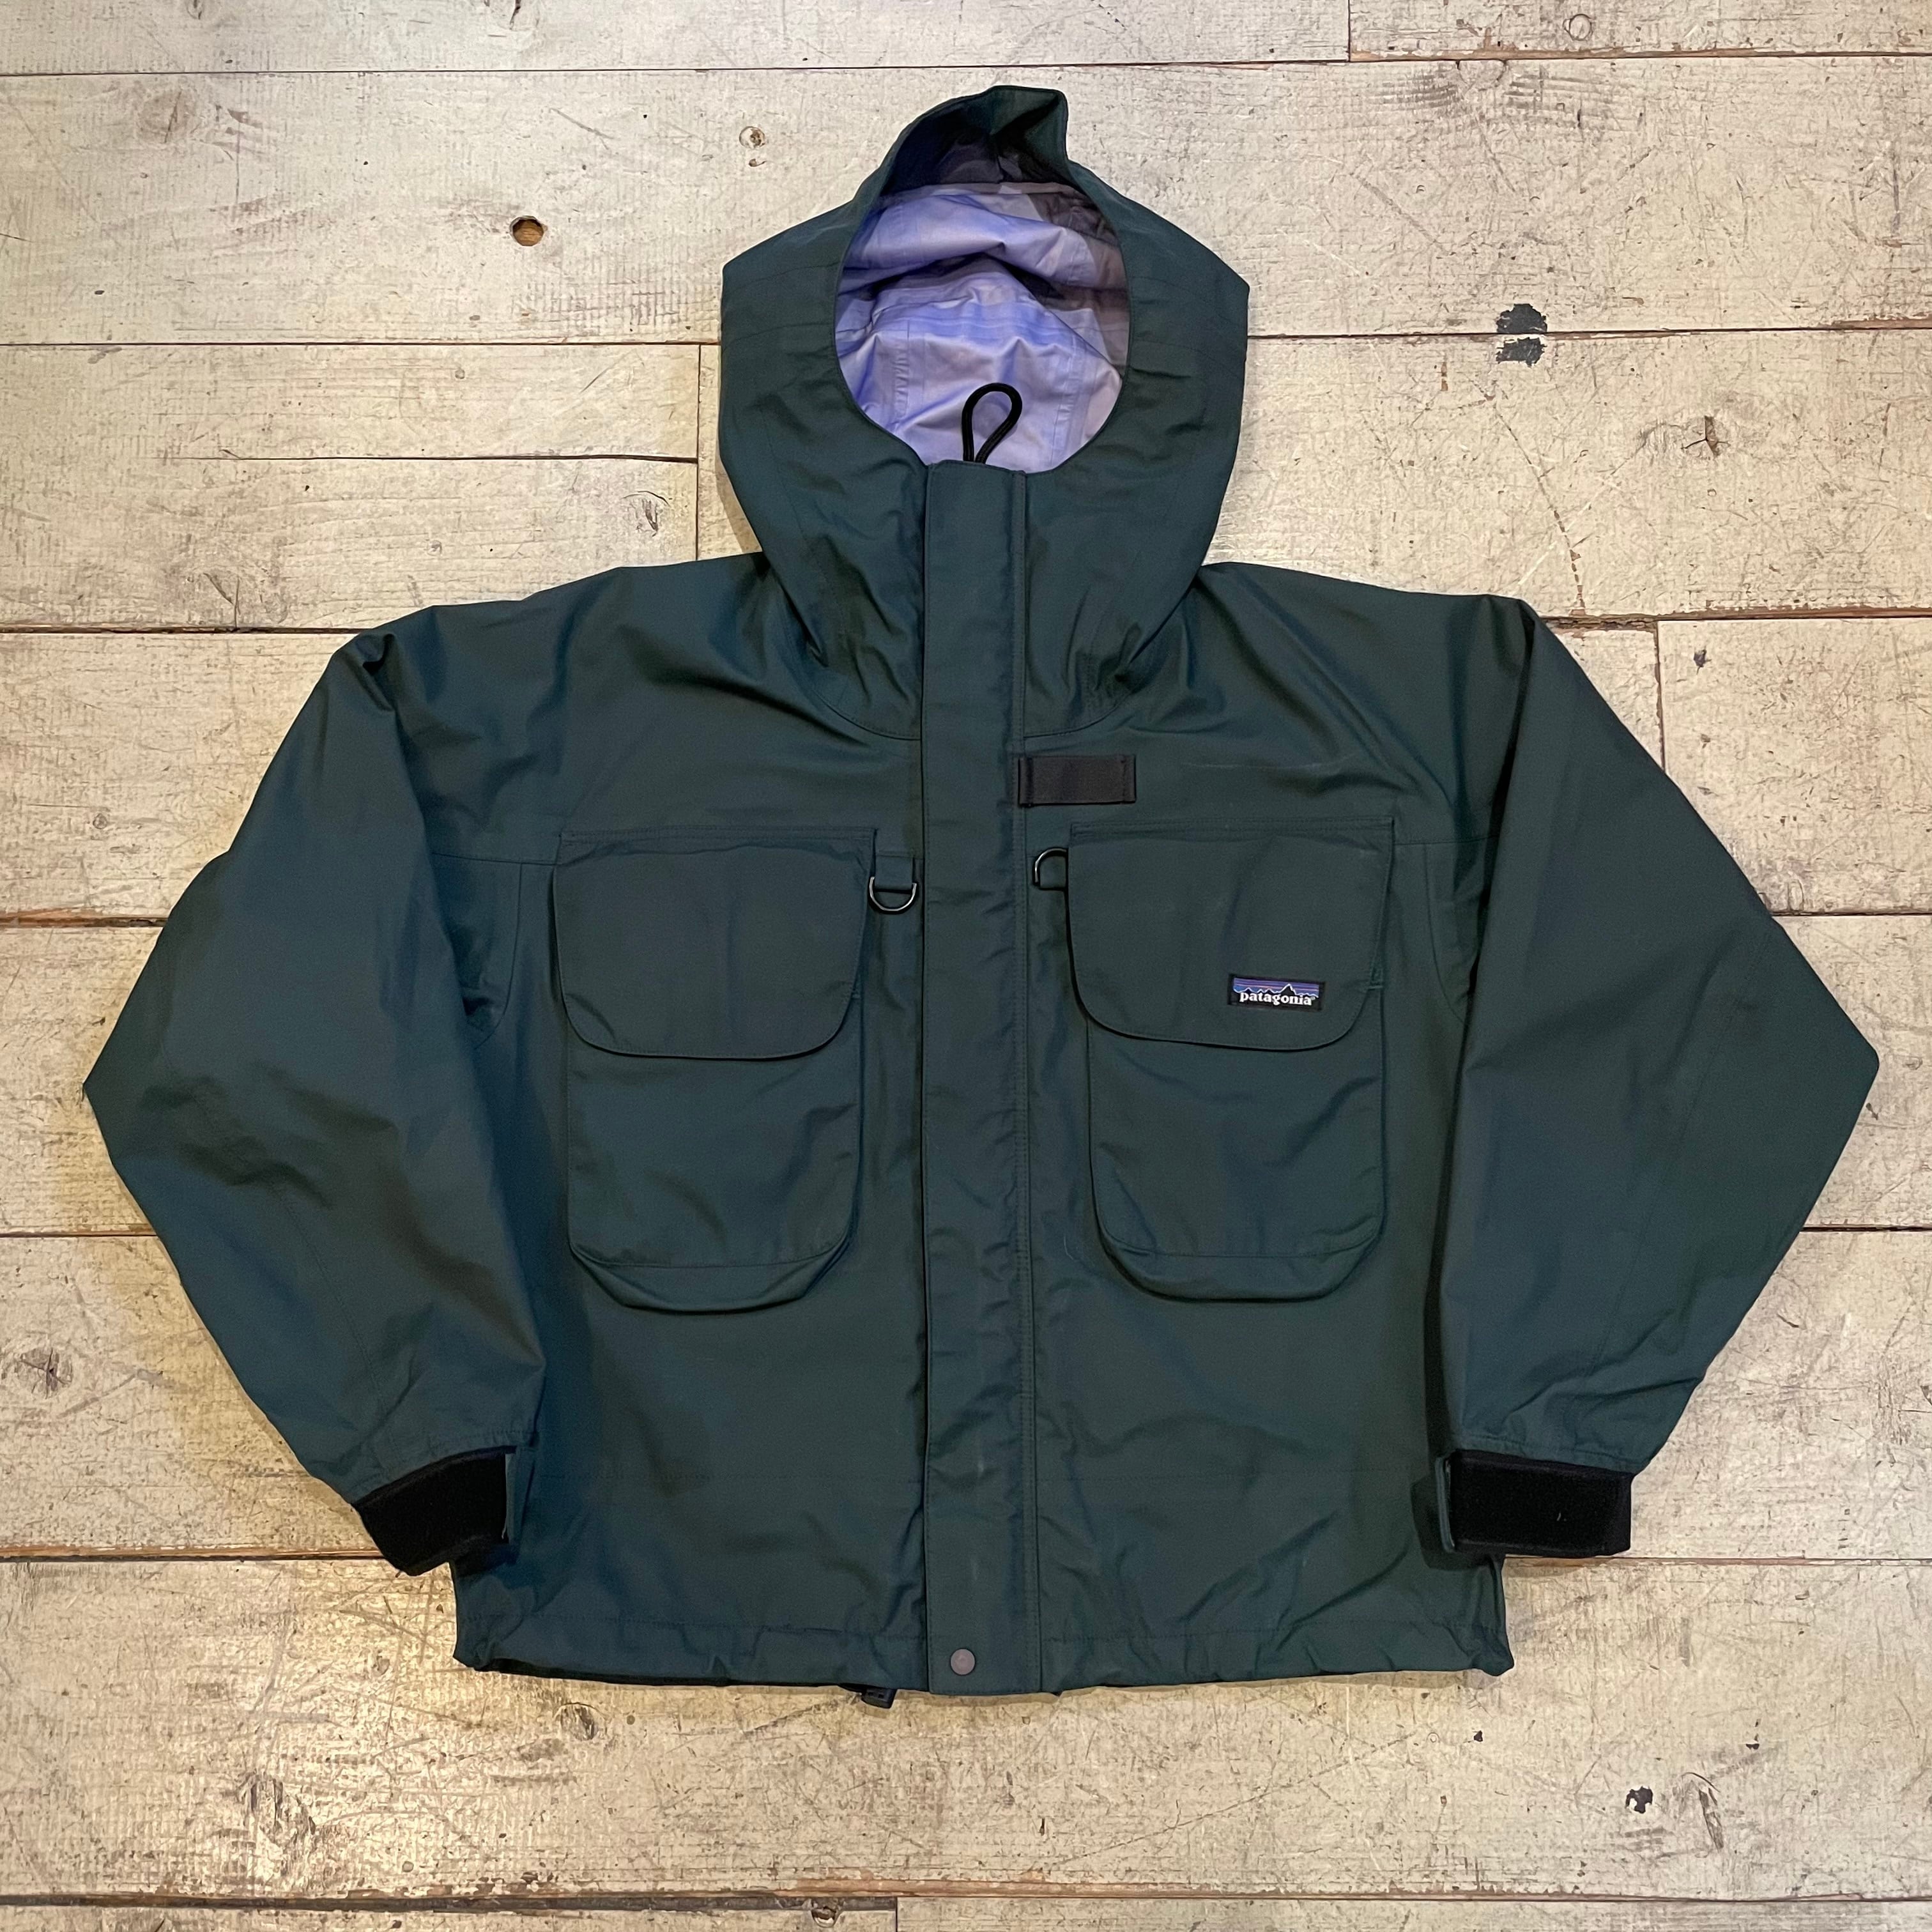 00s Patagonia SST jacket | What'z up